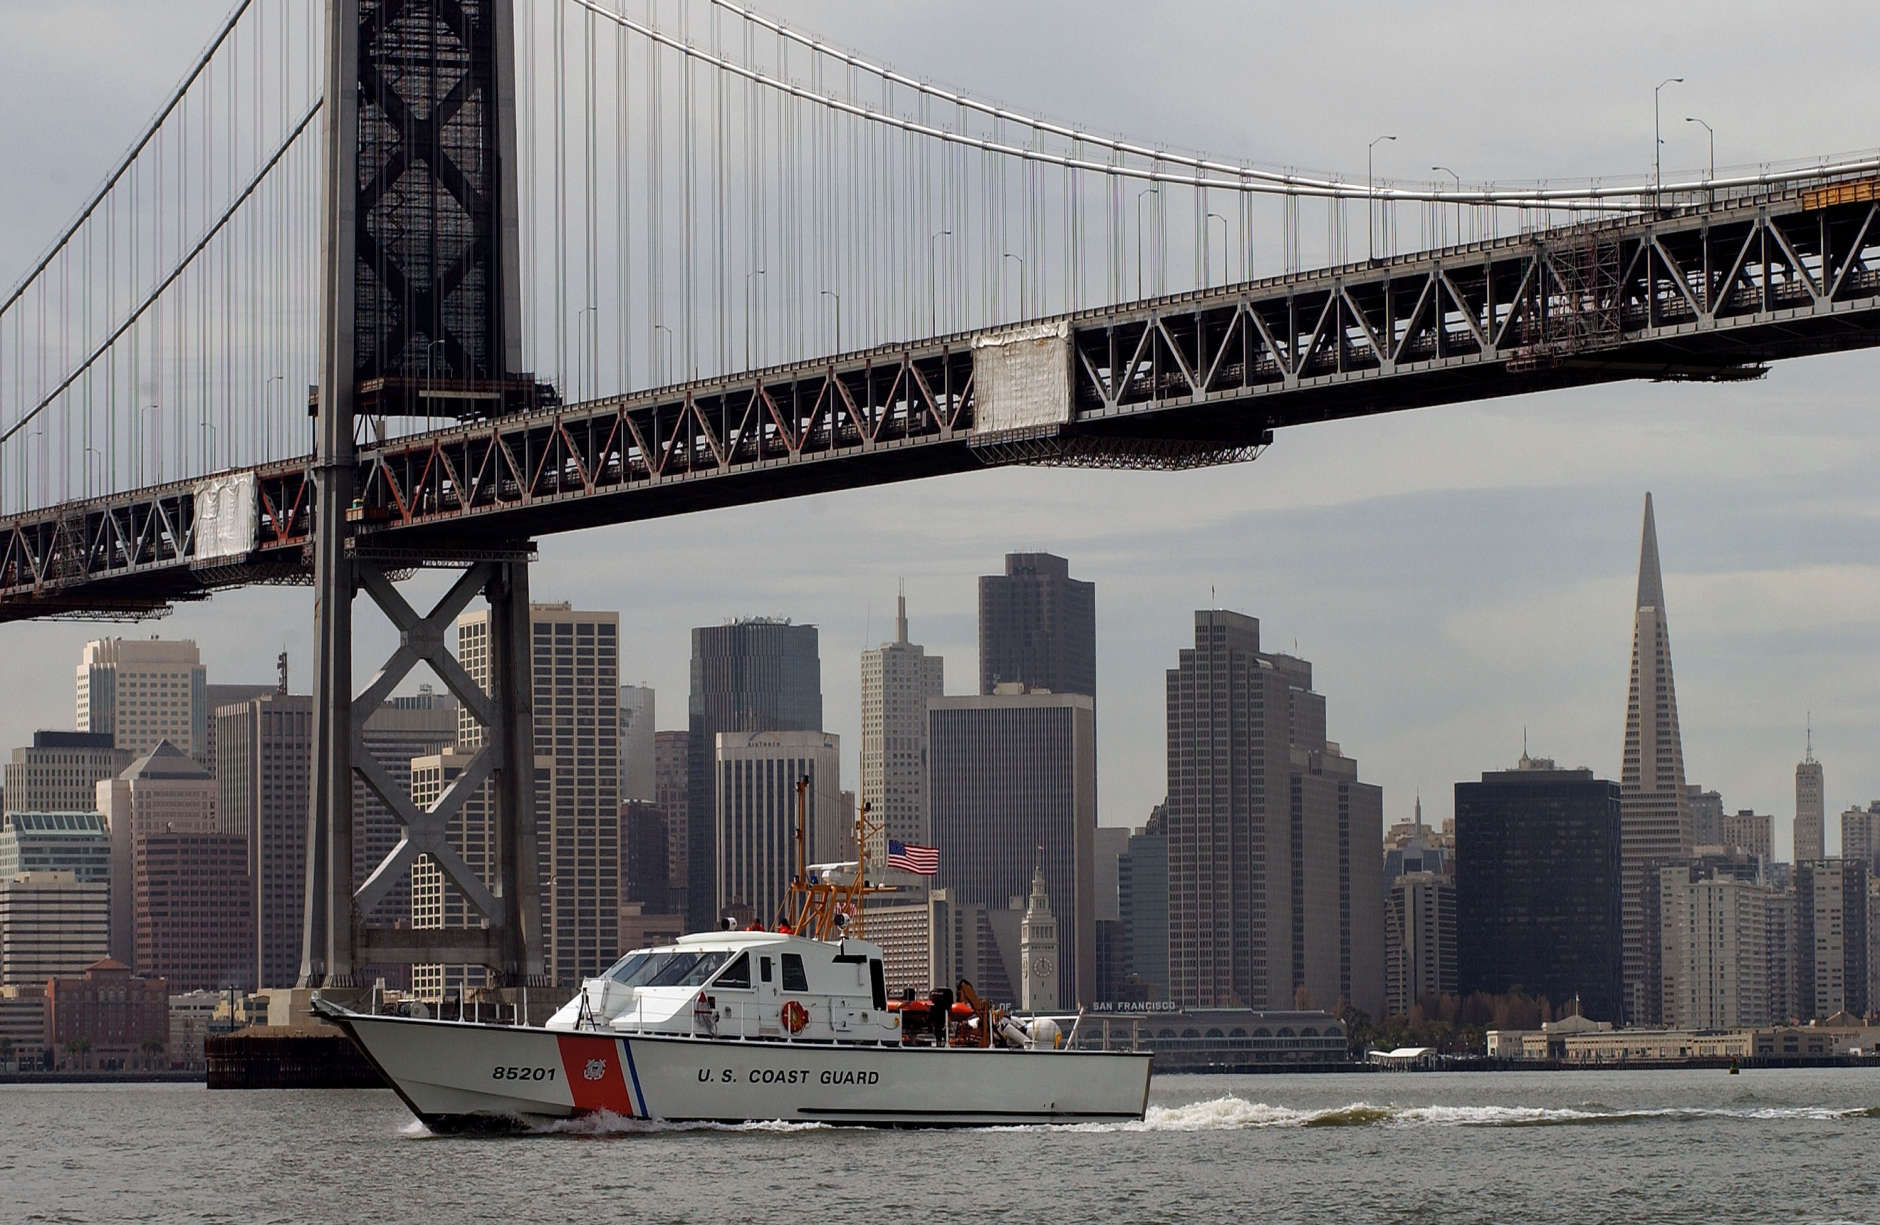 SAN FRANCISCO, CA - MARCH 25, 2003:  With the San Francisco skyline in the background a United States Coast Guard ship travels under the Oakland/San Francisco Bay Bridge on a routine Homeland Security mission March 25, 2003.  Security in the U.S. has been increased since the start of the war with Iraq.  (Photo by David Paul Morris/Getty Images)